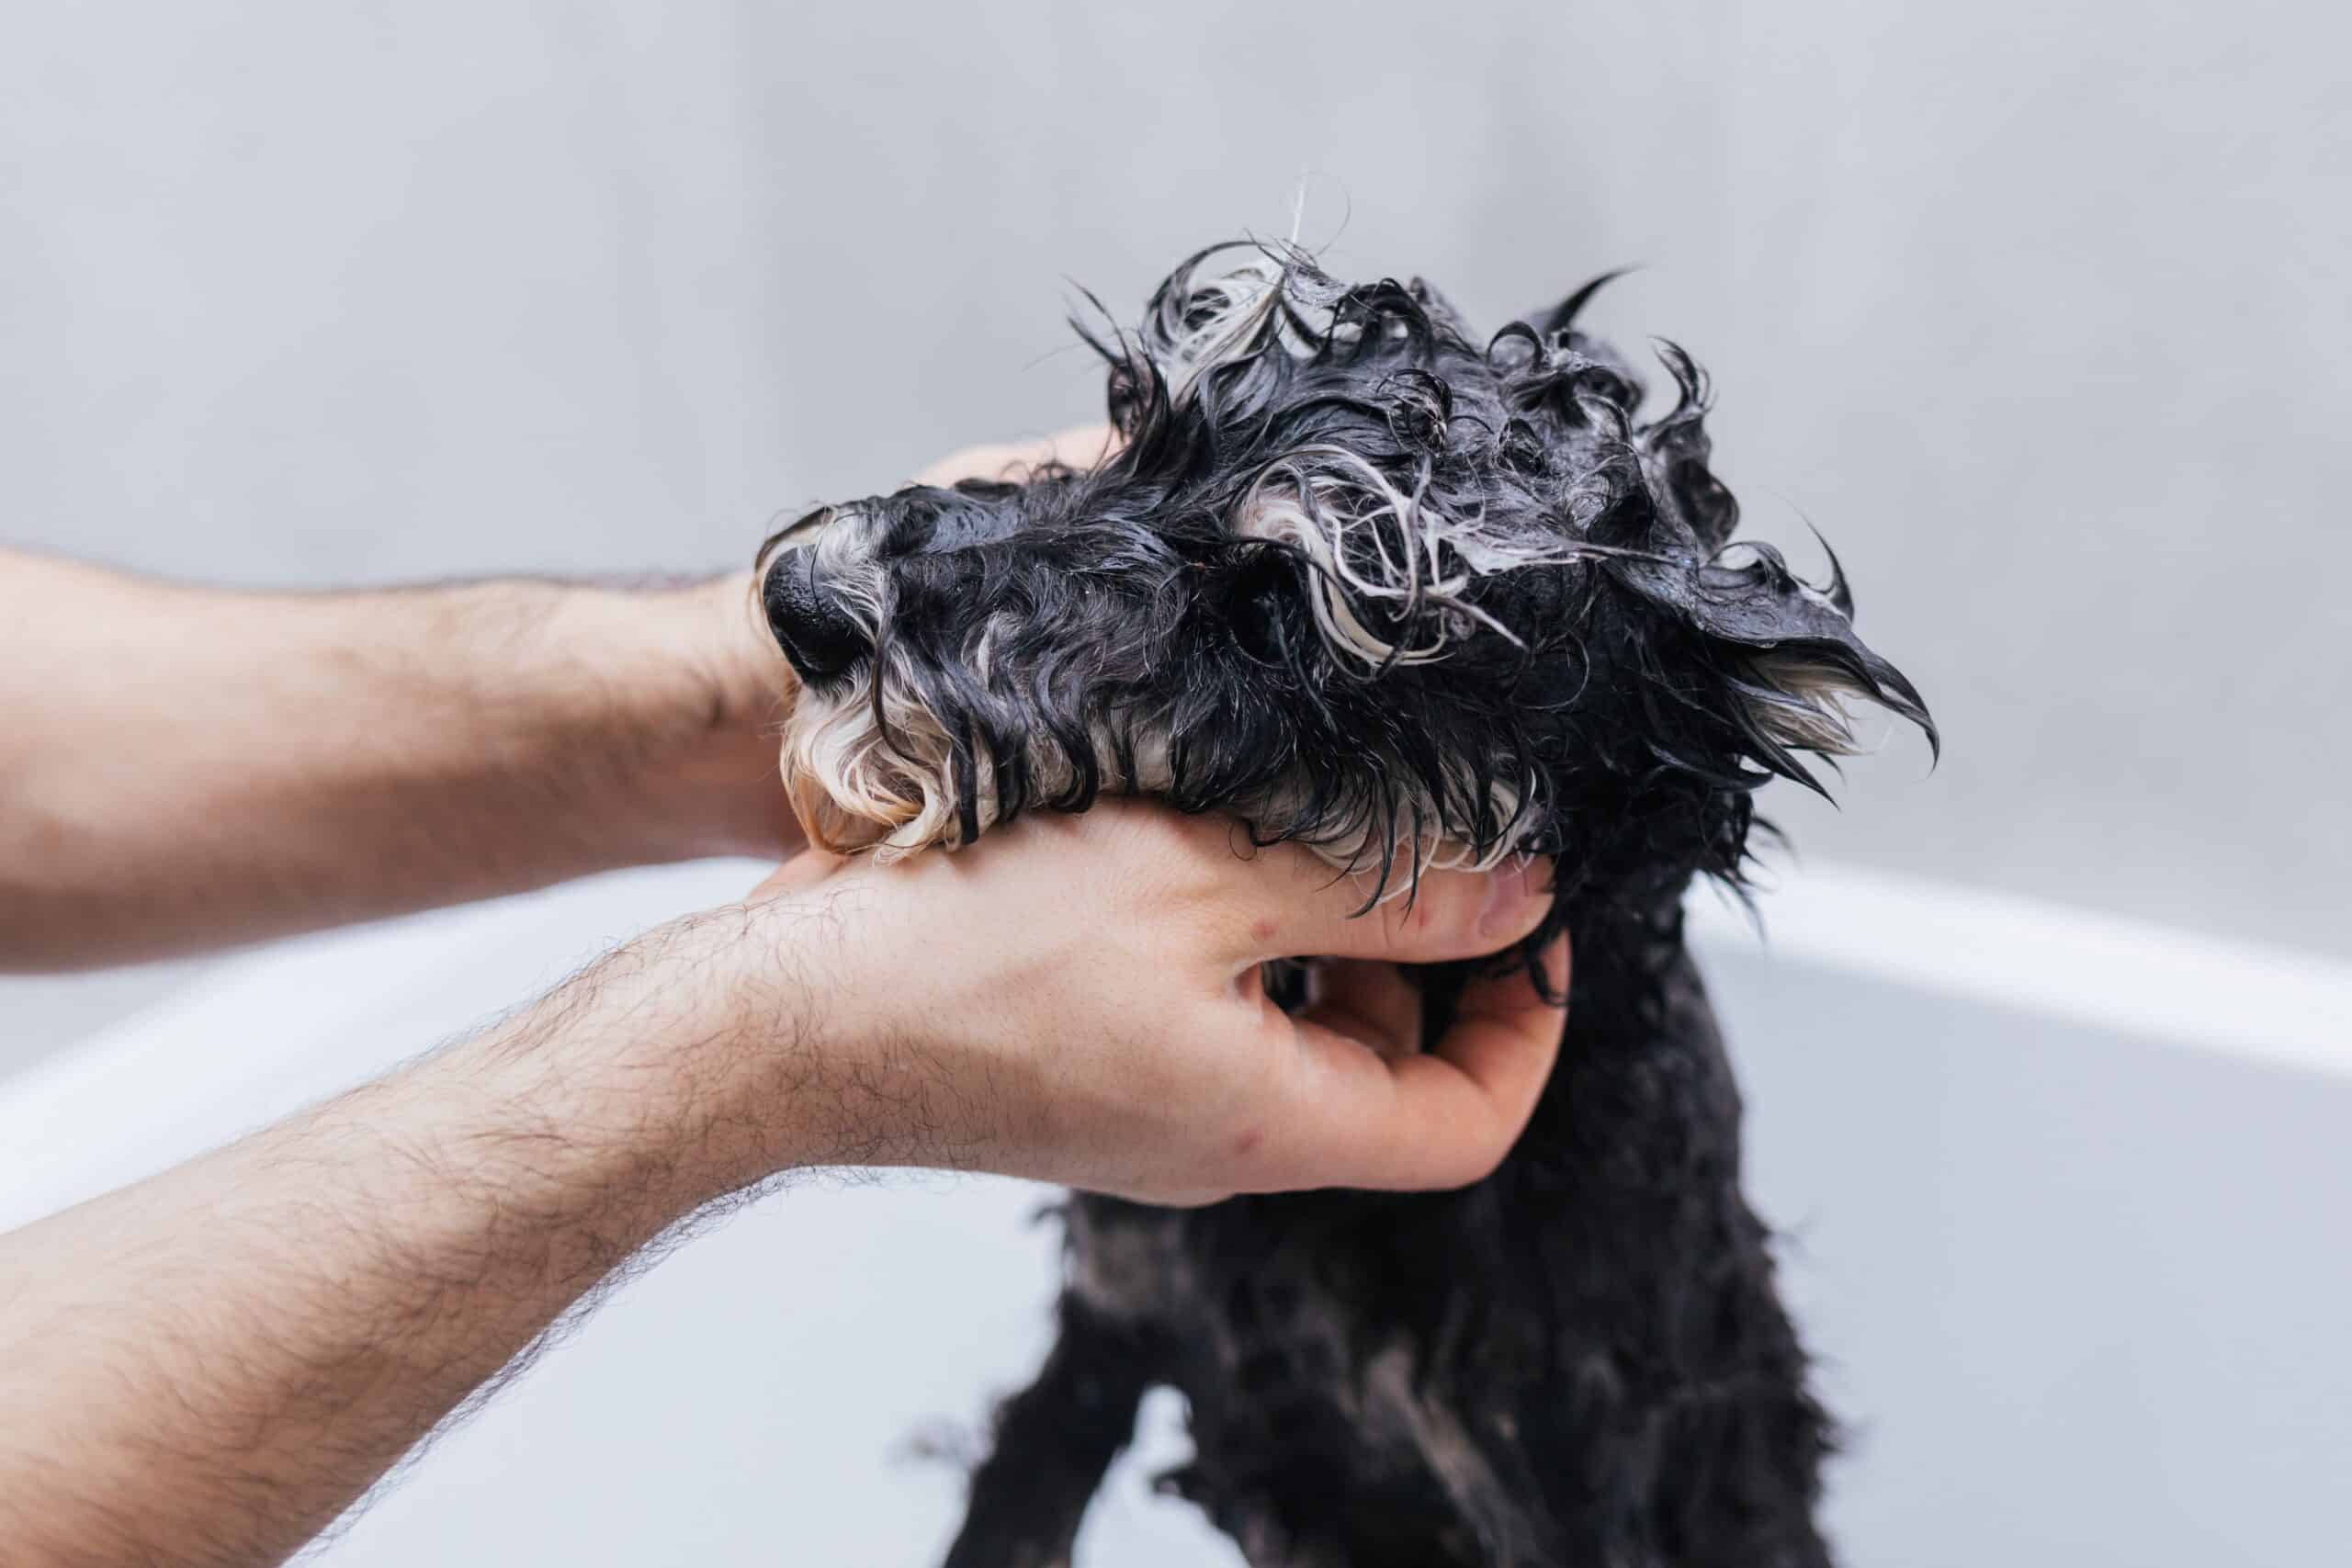 Is Burt’s Bees dog shampoo safe for Puppies?